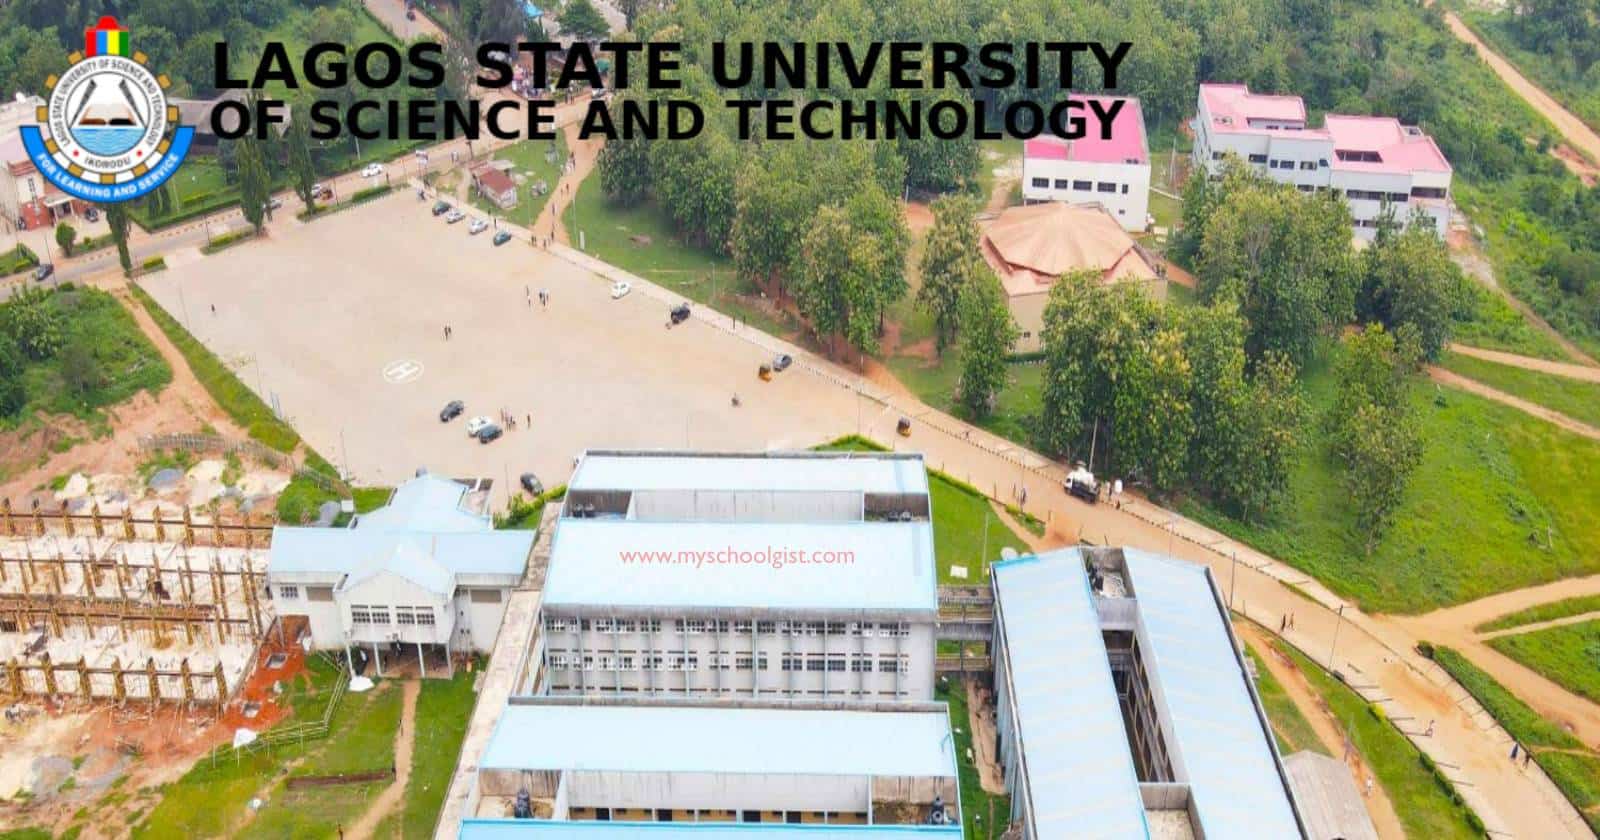 Lagos State University of Science and Technology (LASUSTECH) Matriculation